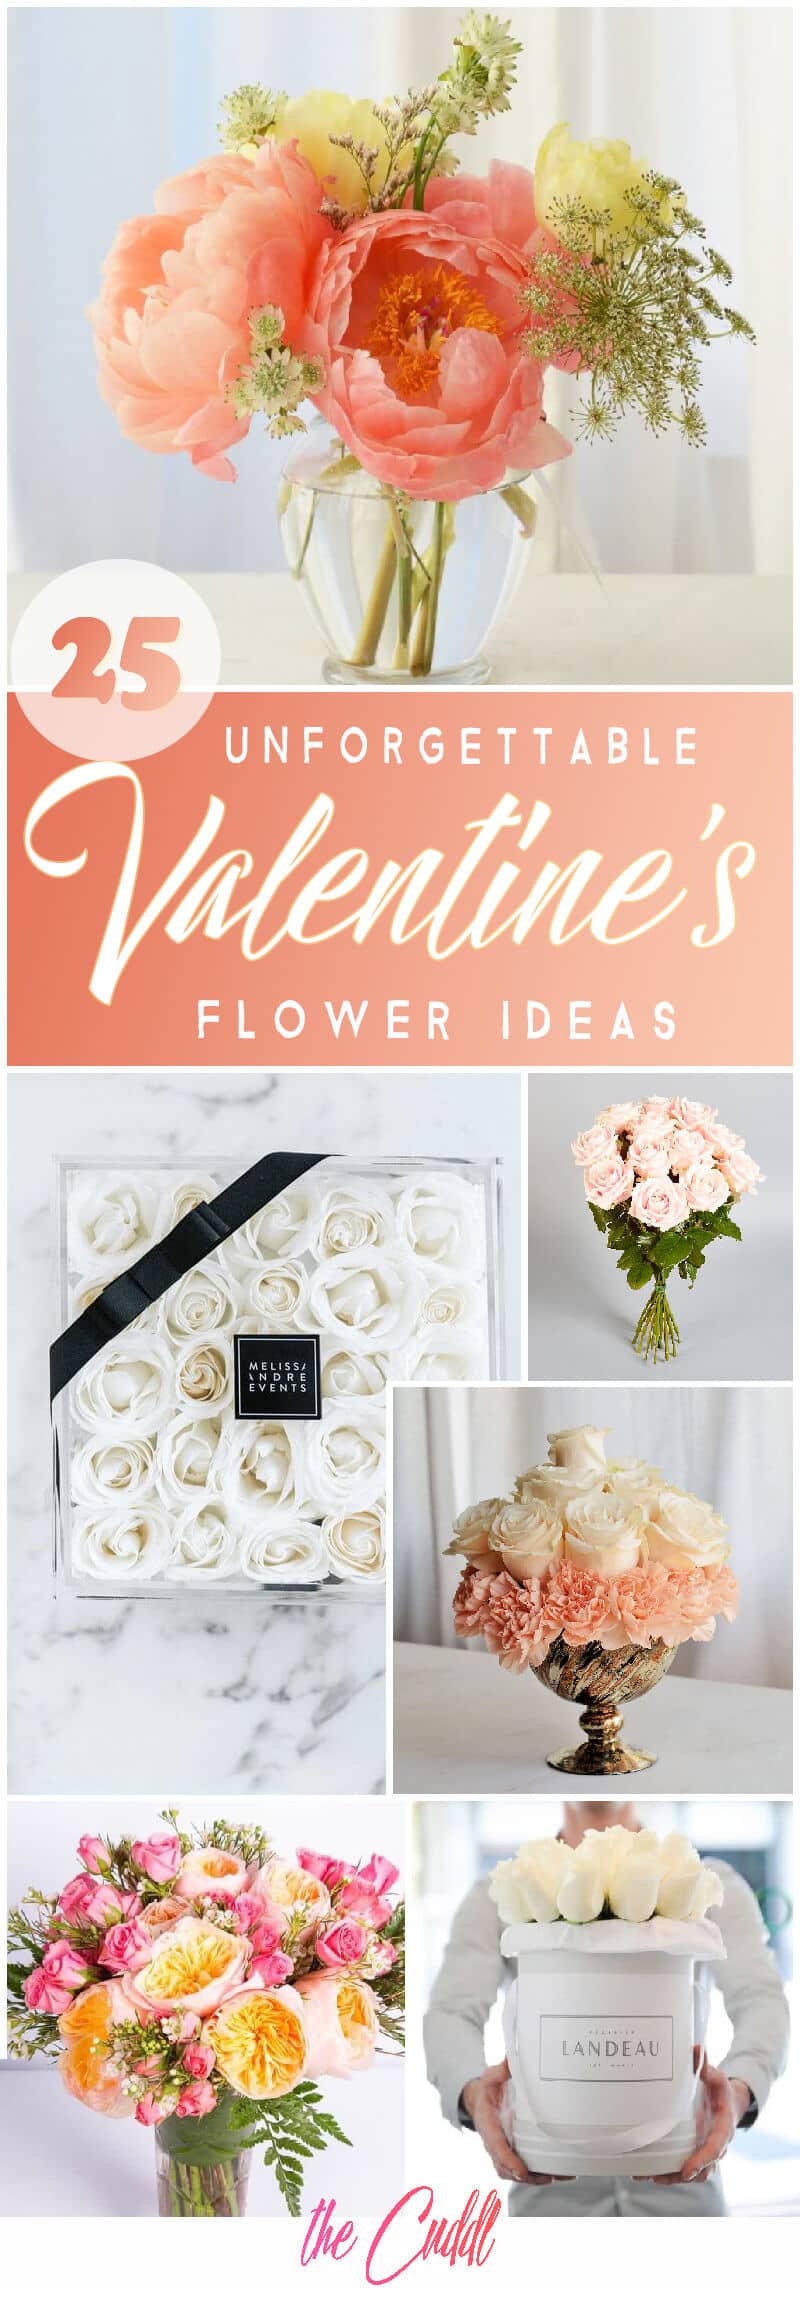 25 Creative Valentine's Day Flower Ideas to Make Your Day Memorable